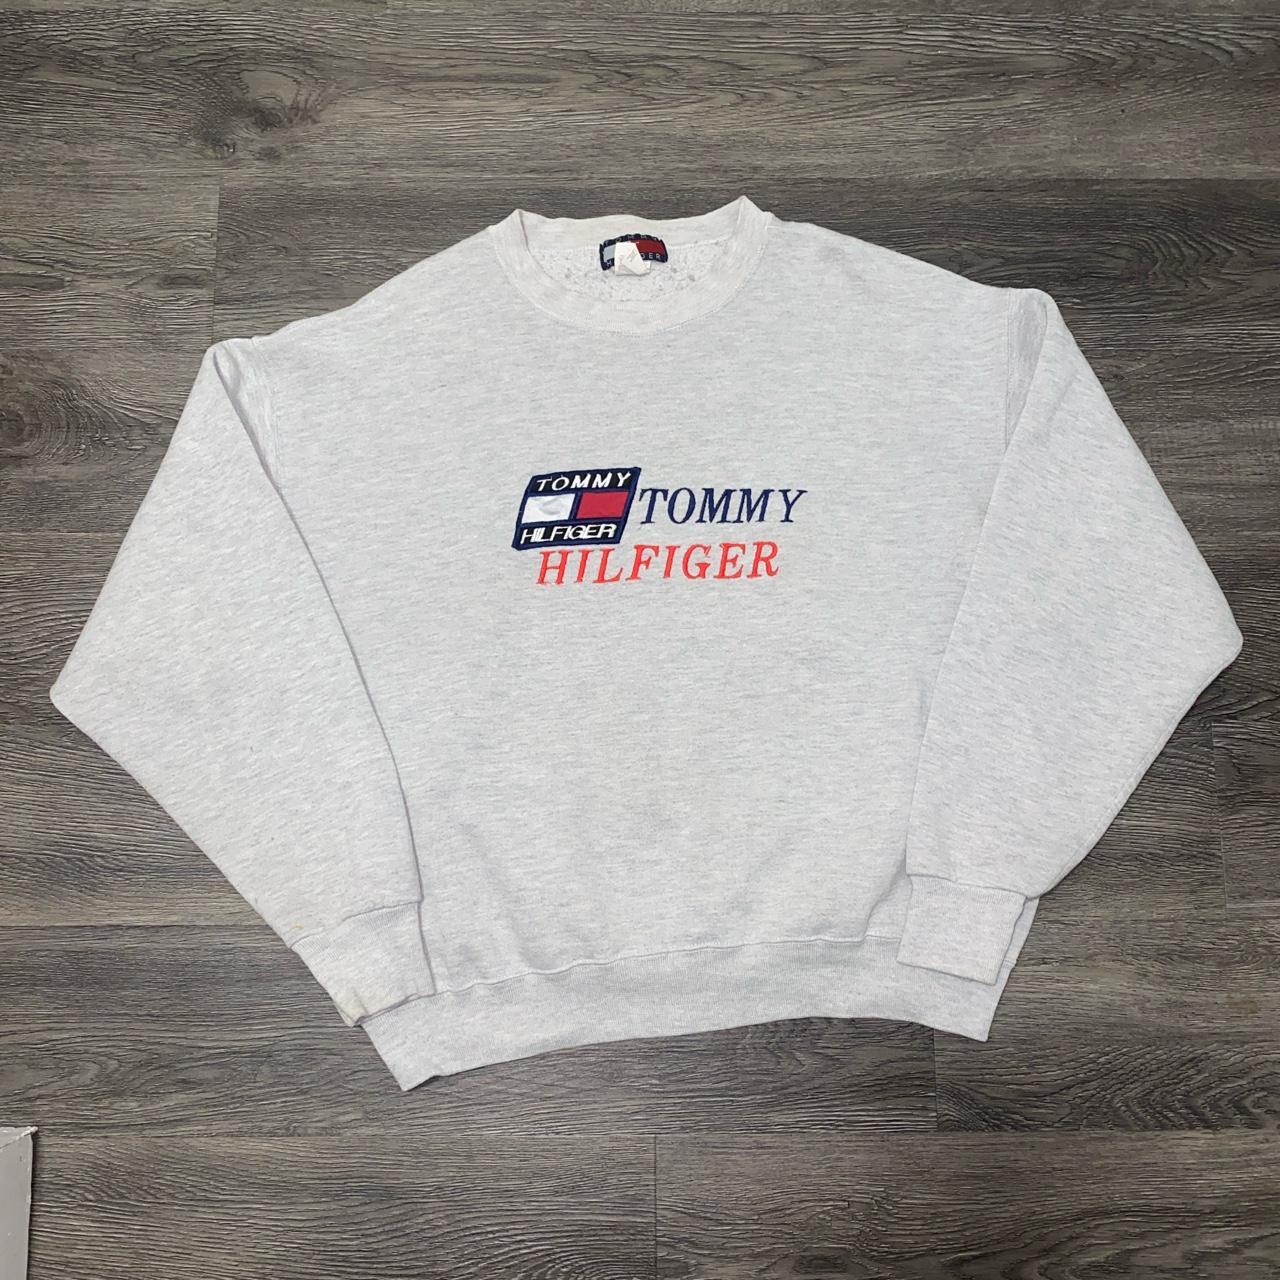 brand new without tags!!! Grey front clip Tommy - Depop